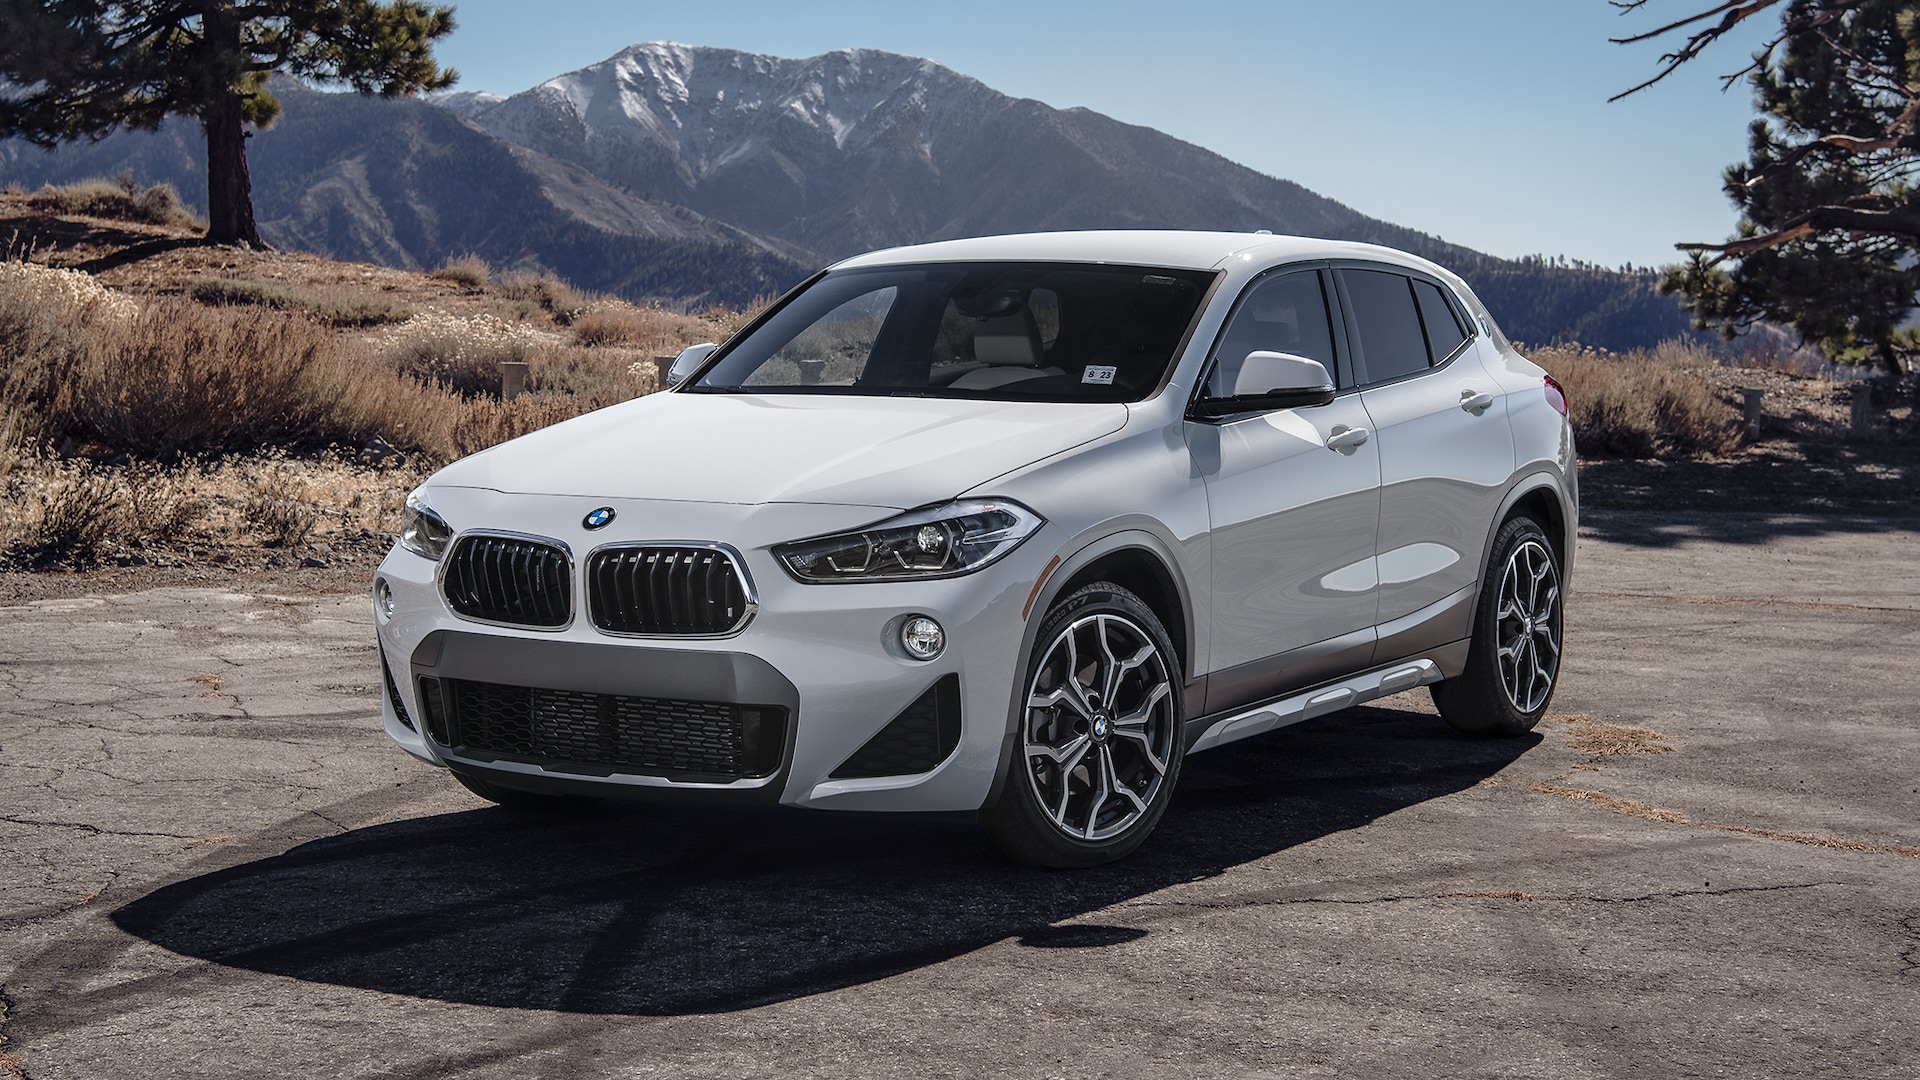 2018 BMW X2 Long-Term Arrival: One Year in a FWD BMW